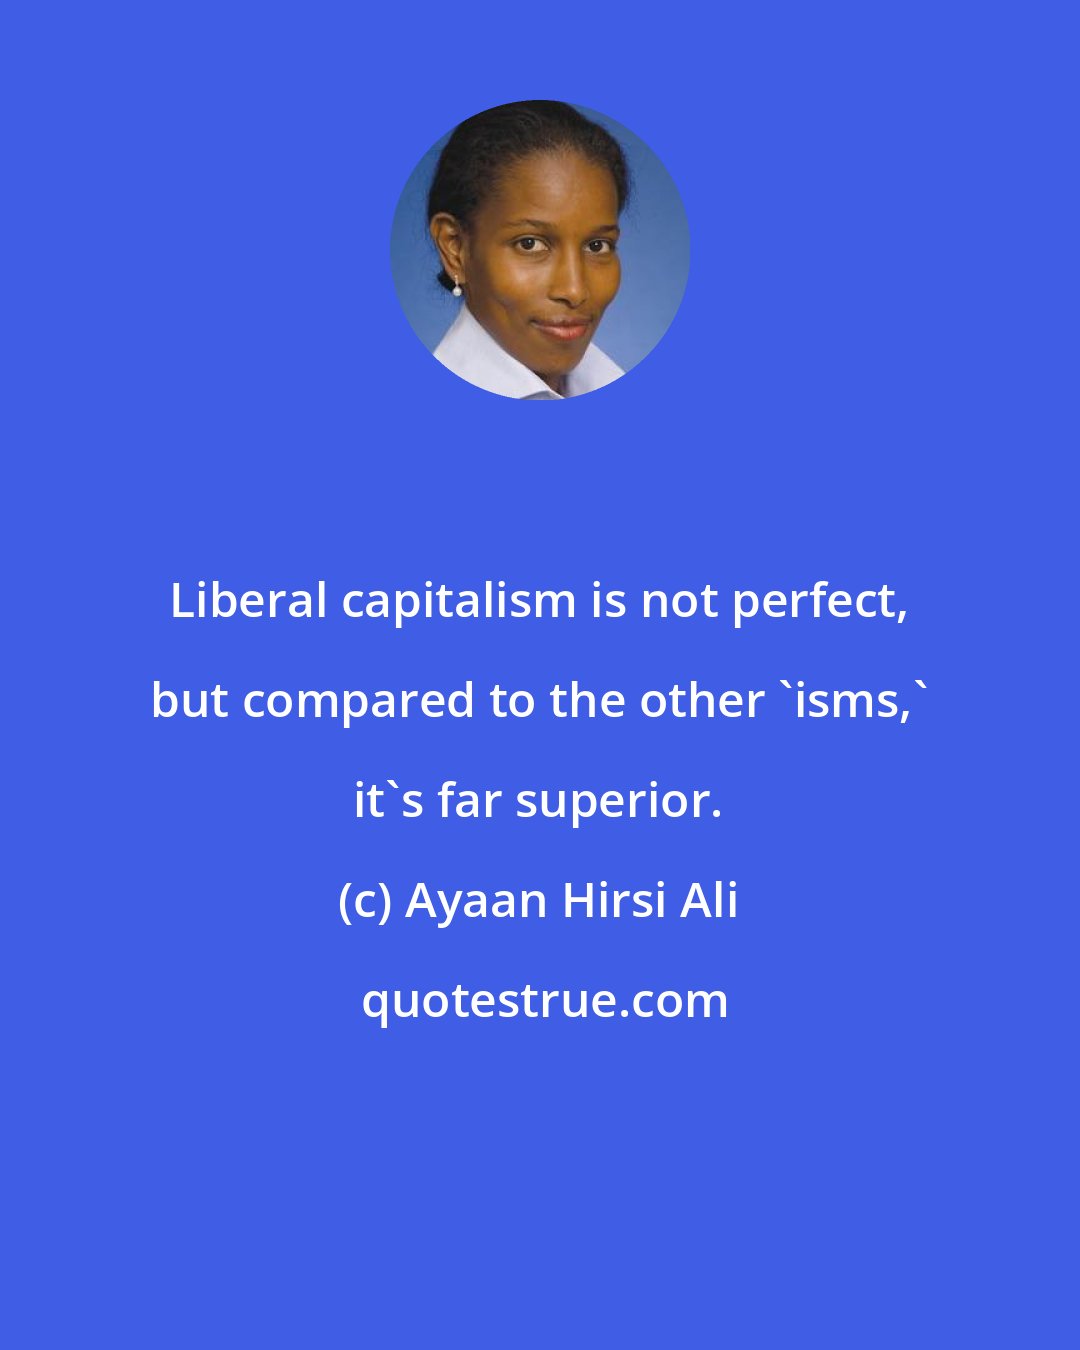 Ayaan Hirsi Ali: Liberal capitalism is not perfect, but compared to the other 'isms,' it's far superior.